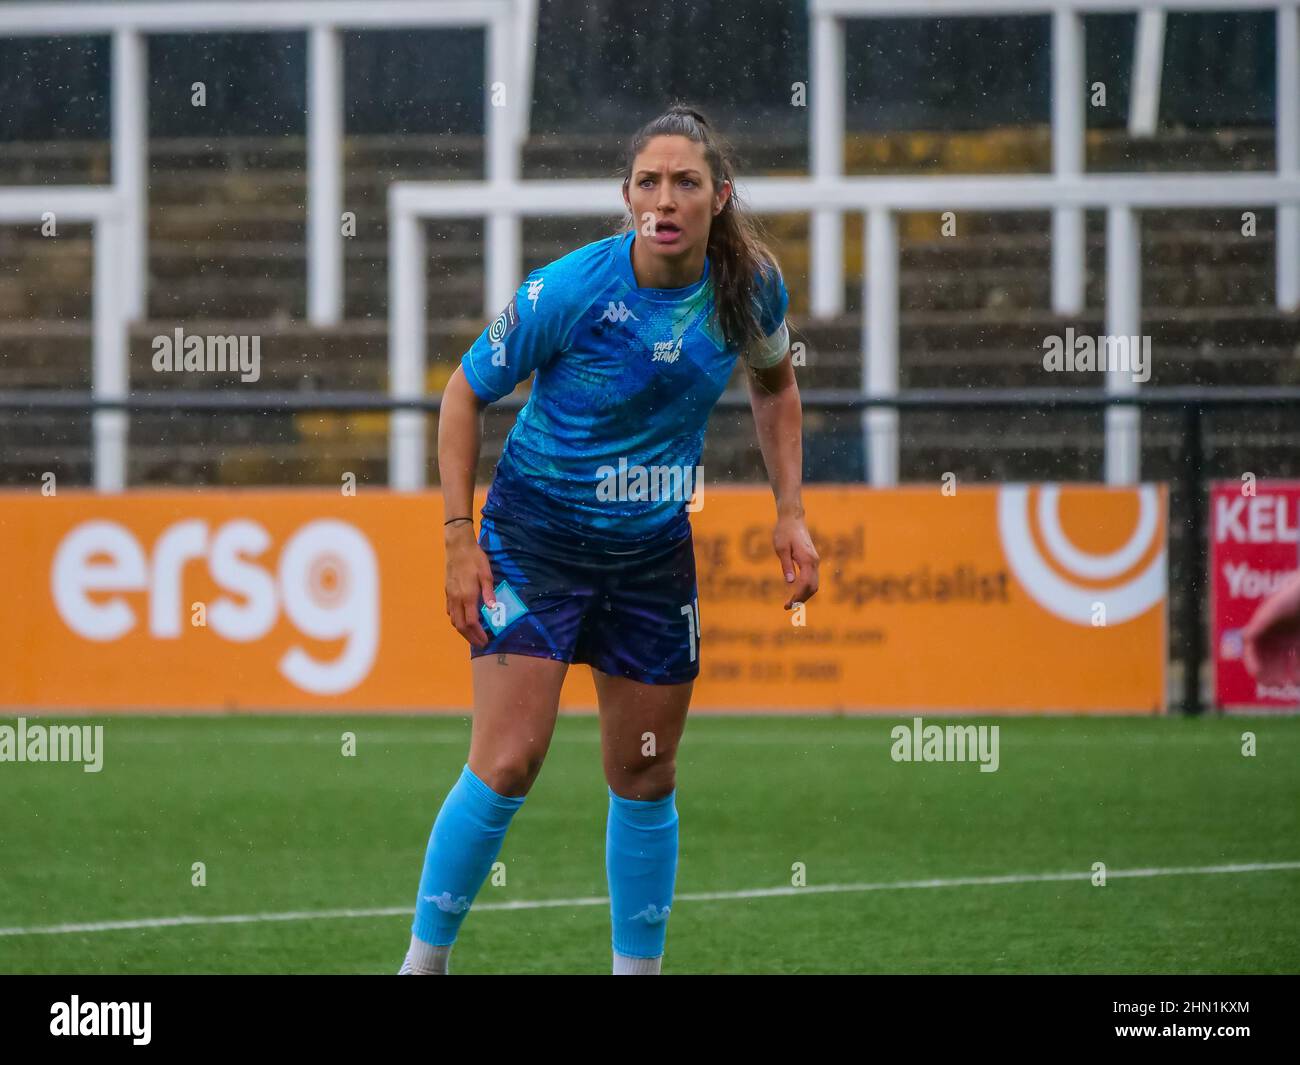 Bromley, Kent, UK. 13th Feb, 2022. Bromley FC Stadium, Hayes Lane, Bromley, Kent 13th February 2022 Harley Bennett (14 Captain London City Lionesses) waits for a corner in the match between Crystal Palace Women vs London City Lionesses in the Women's FA Championship at Bromley FC Stadium, Hayes Lane, Bromley on 13th February 2022 Claire Jeffrey/SPP Credit: SPP Sport Press Photo. /Alamy Live News Stock Photo